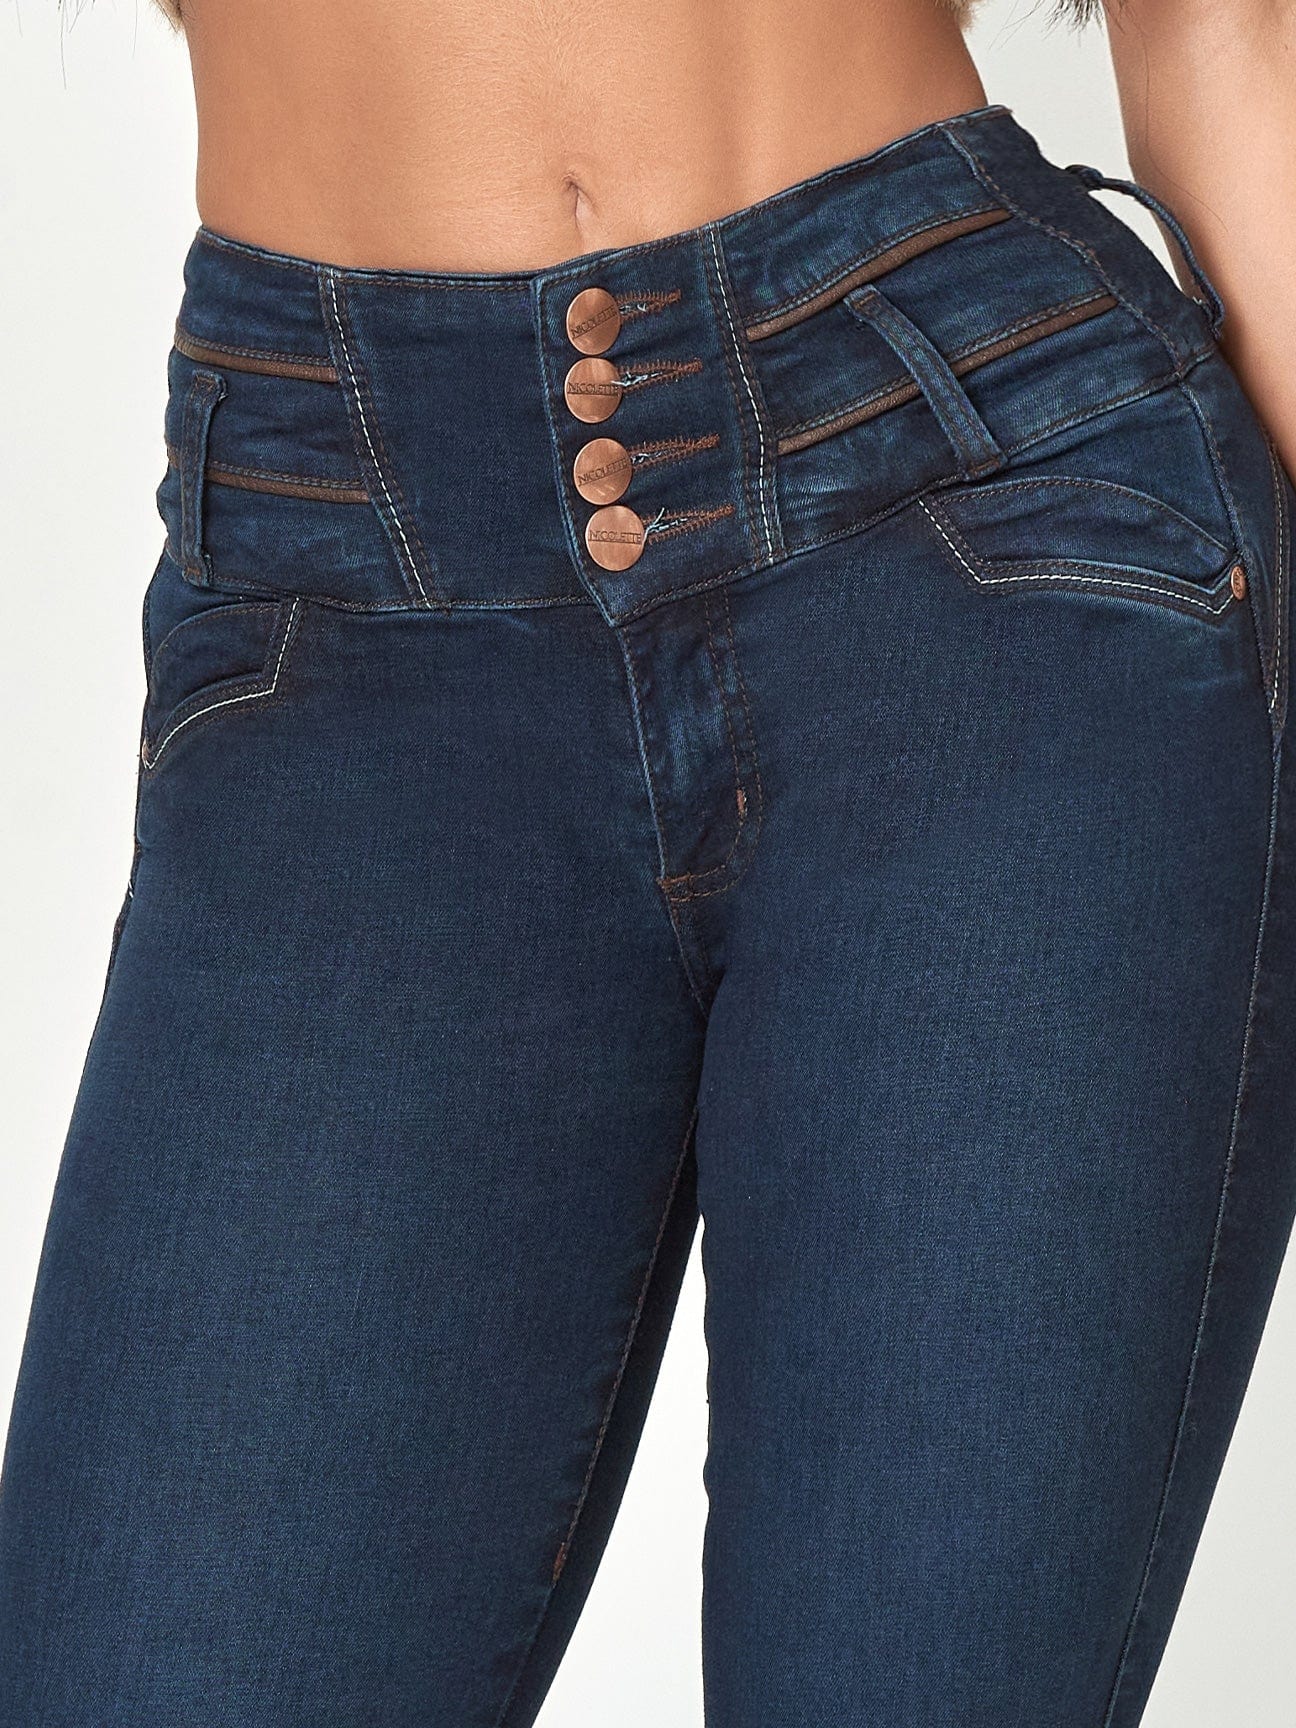 Mia High Rise Skinny Jeans front waist view.